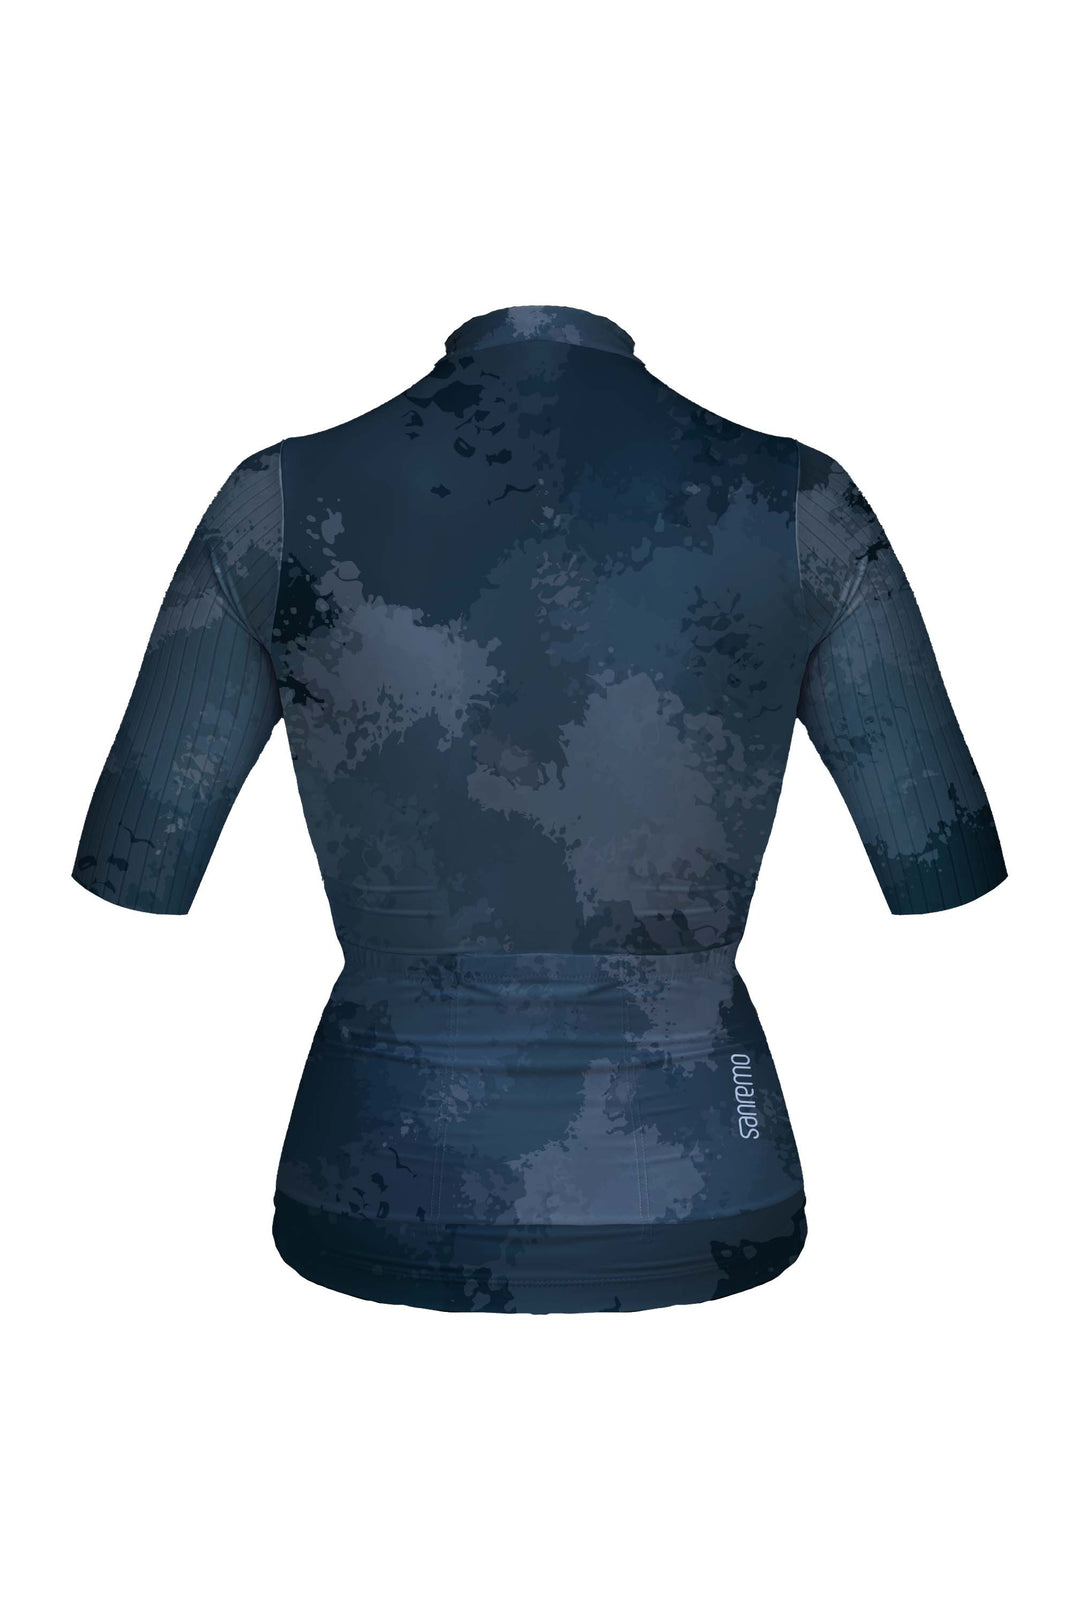 Jersey Corsa Forest- Mujer